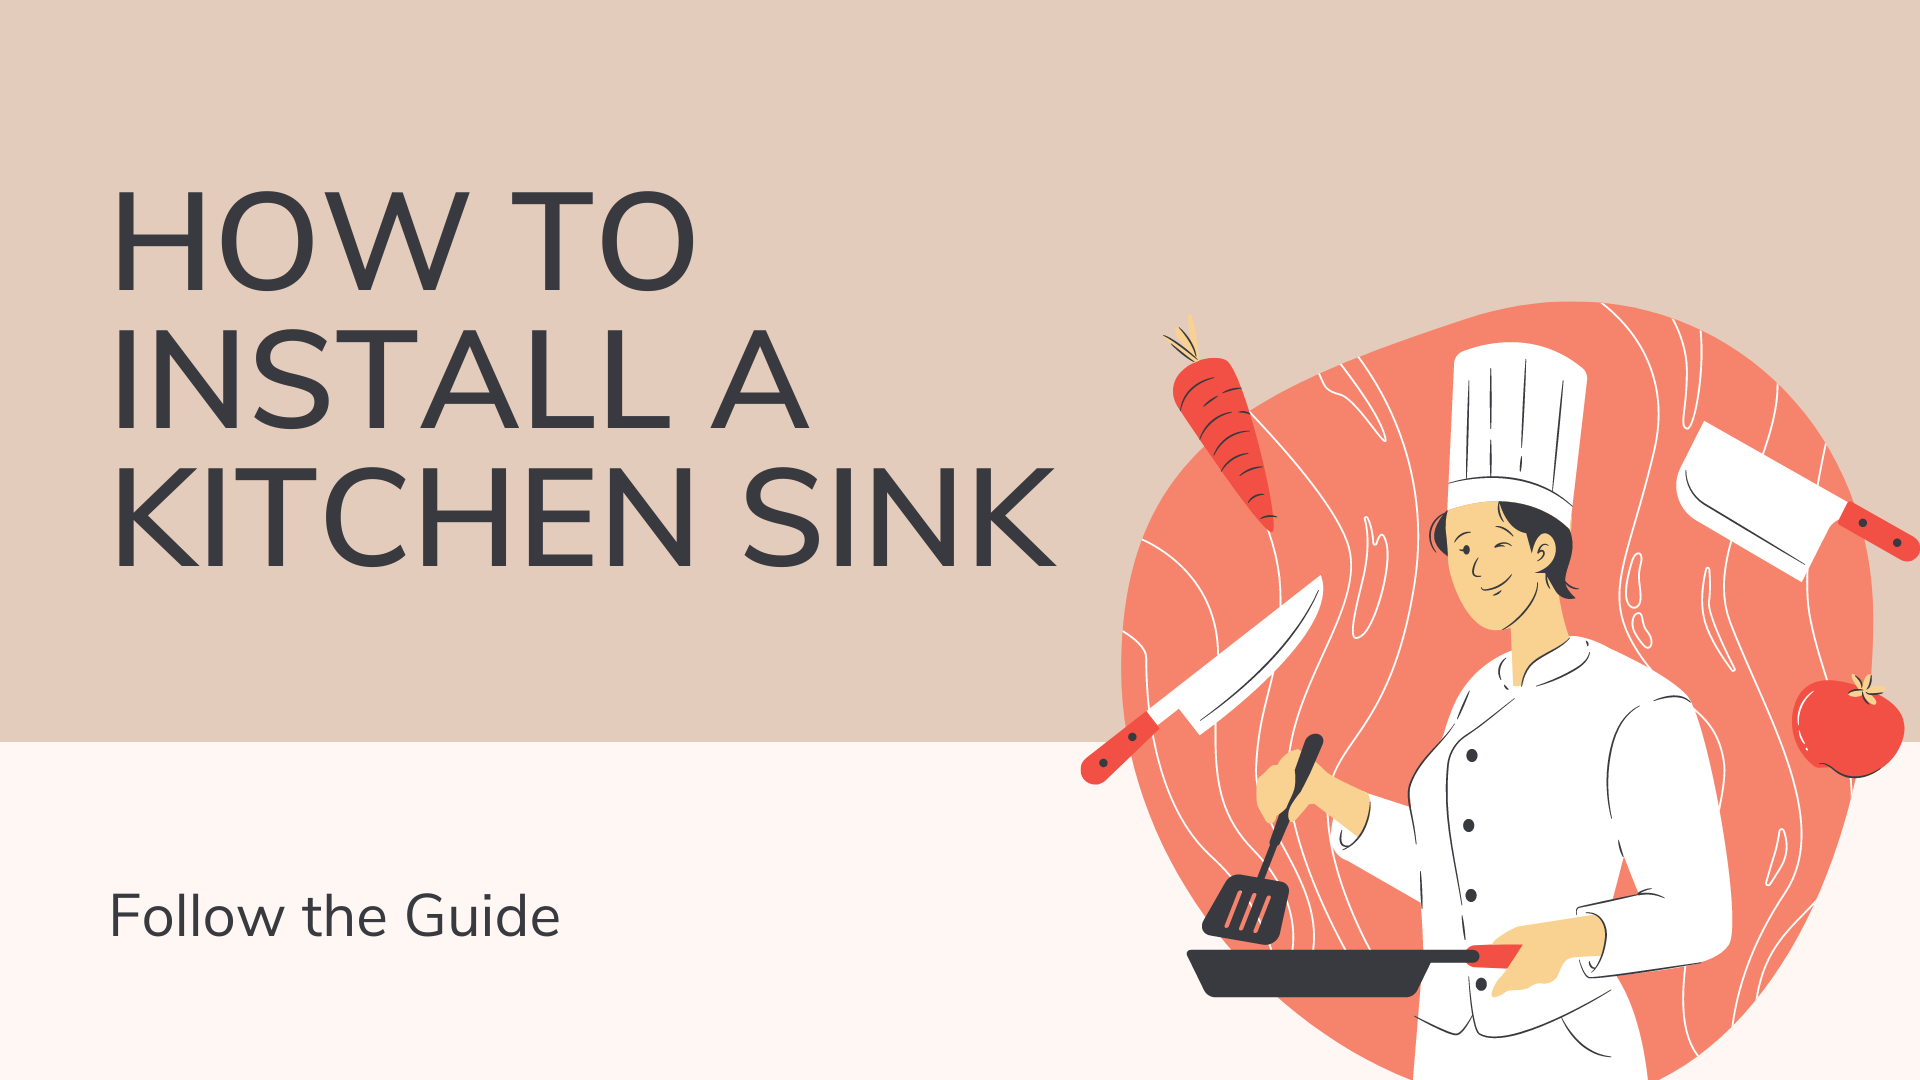 How to Install a Kitchen Sink? Follow the Guide